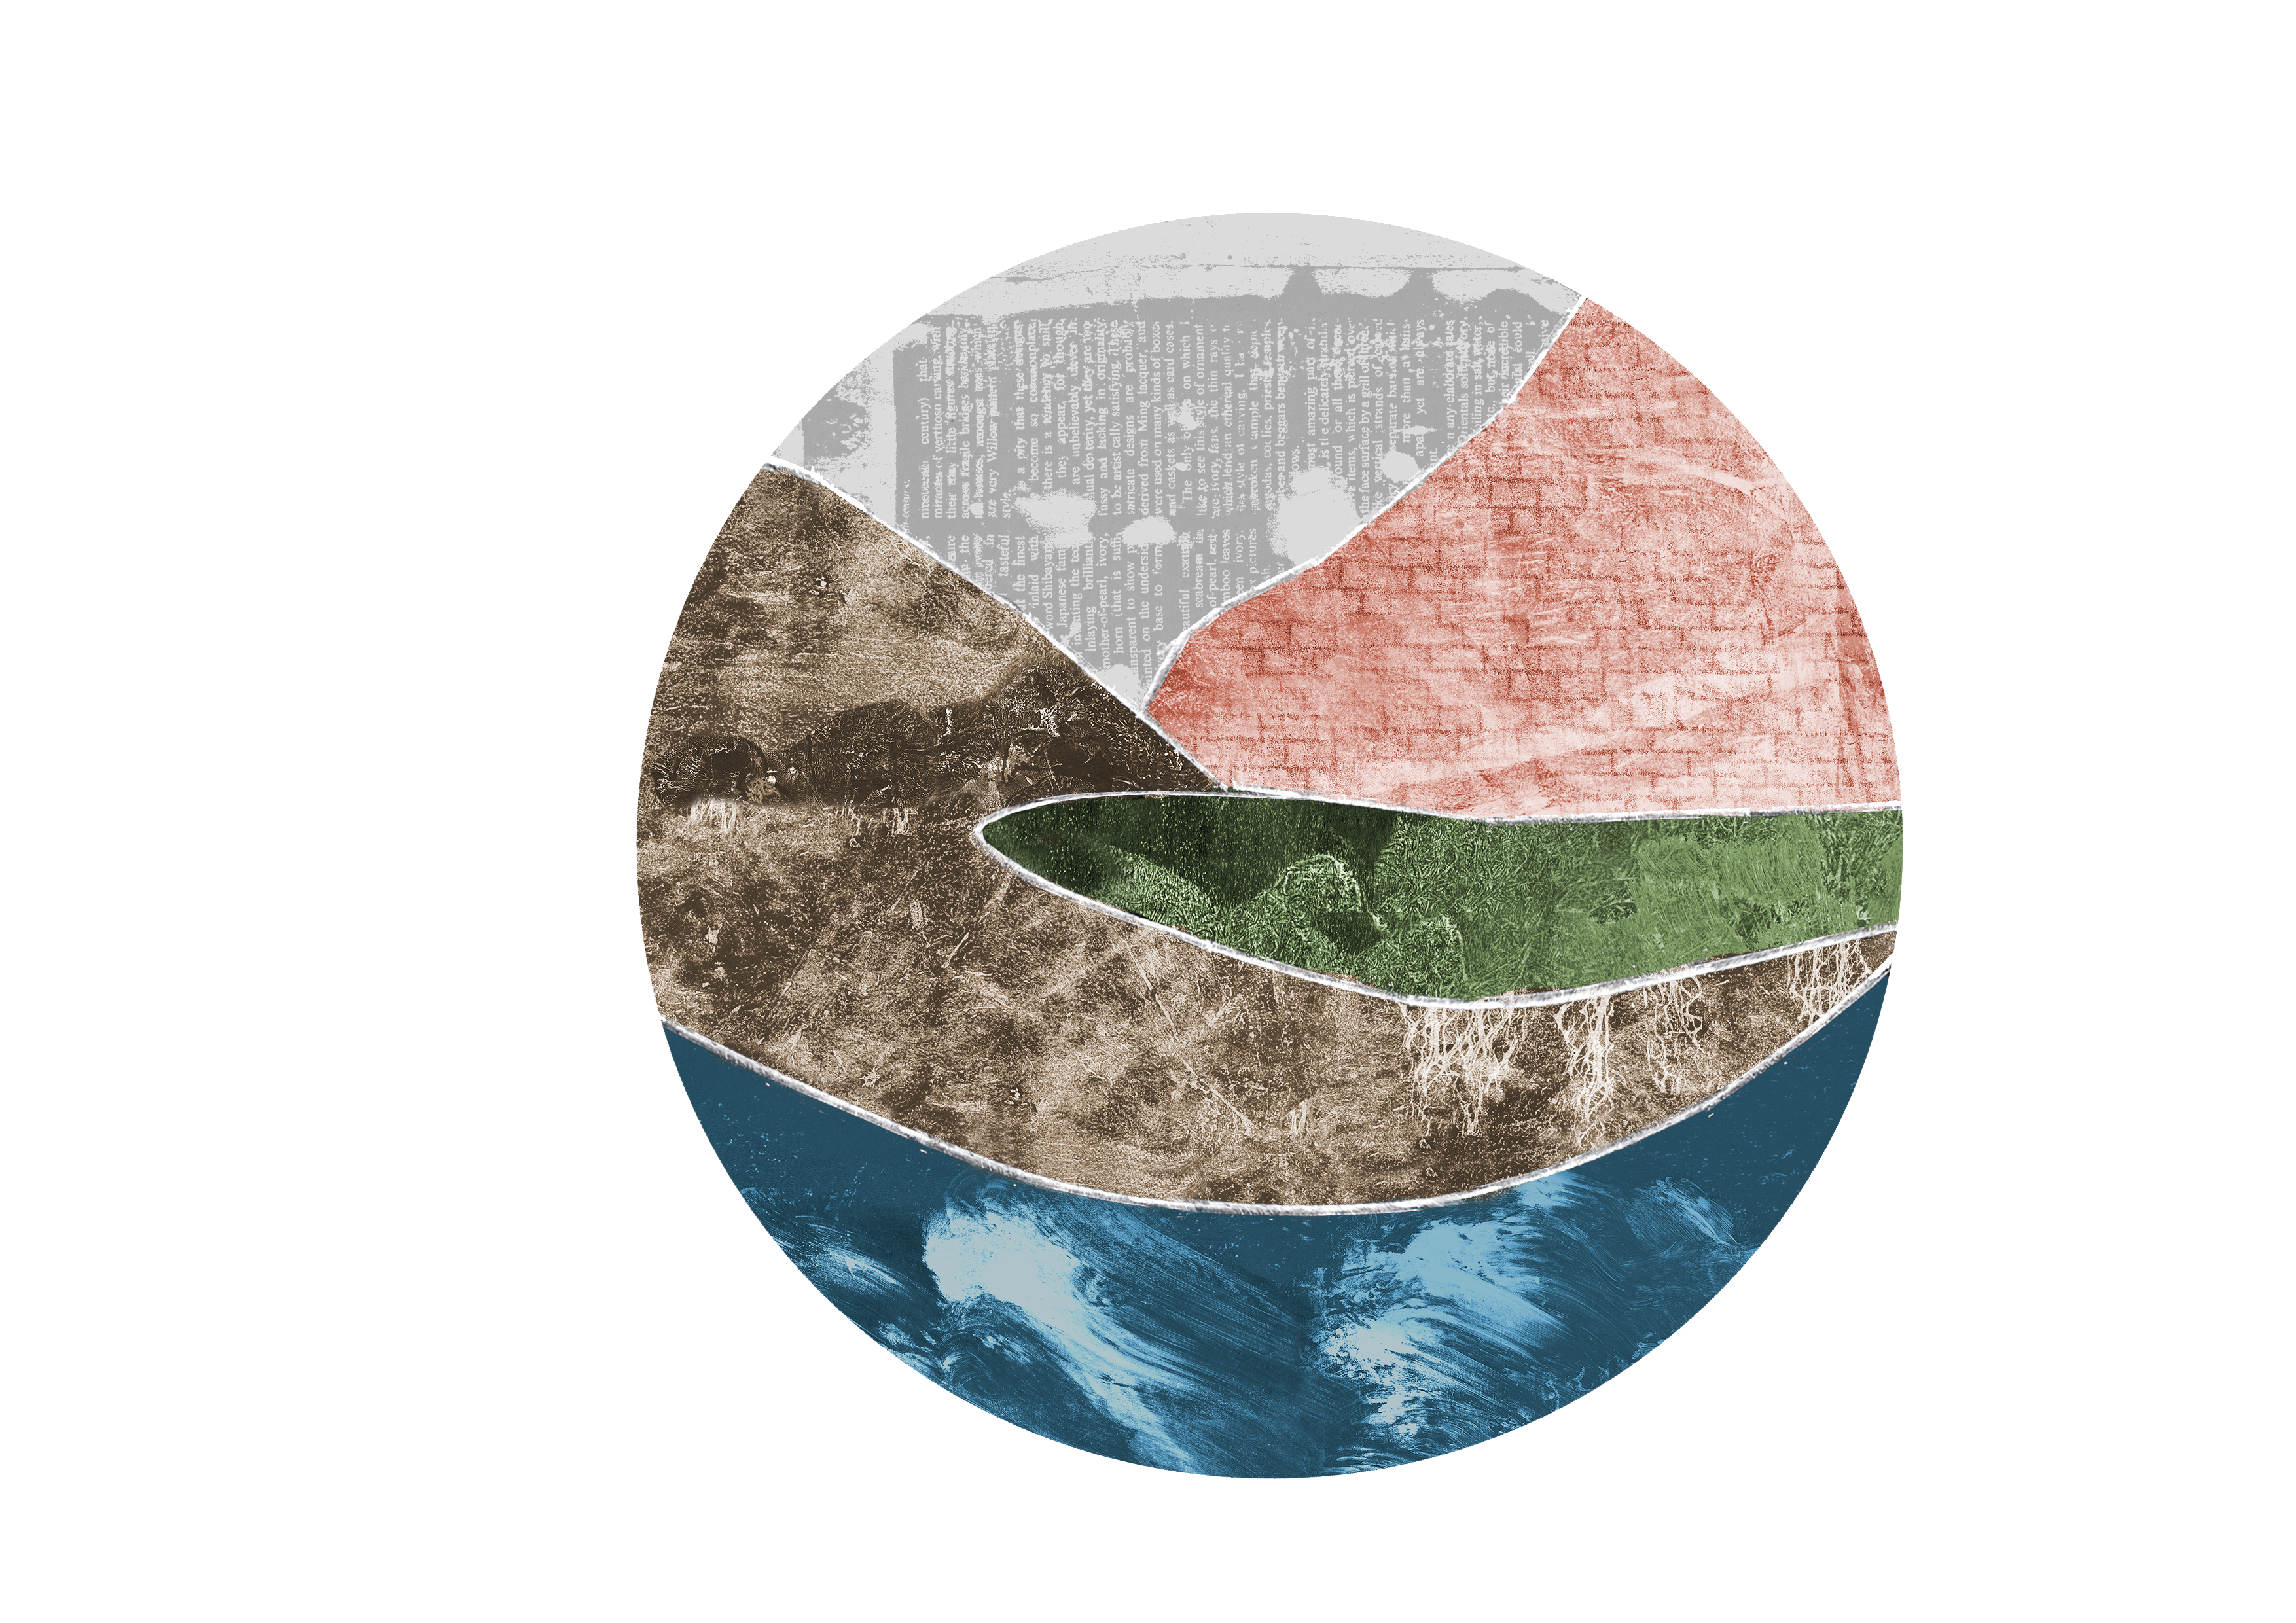 a round logo comprising of different textured layers of blue waves up to brown soil, green grass, red brick to text